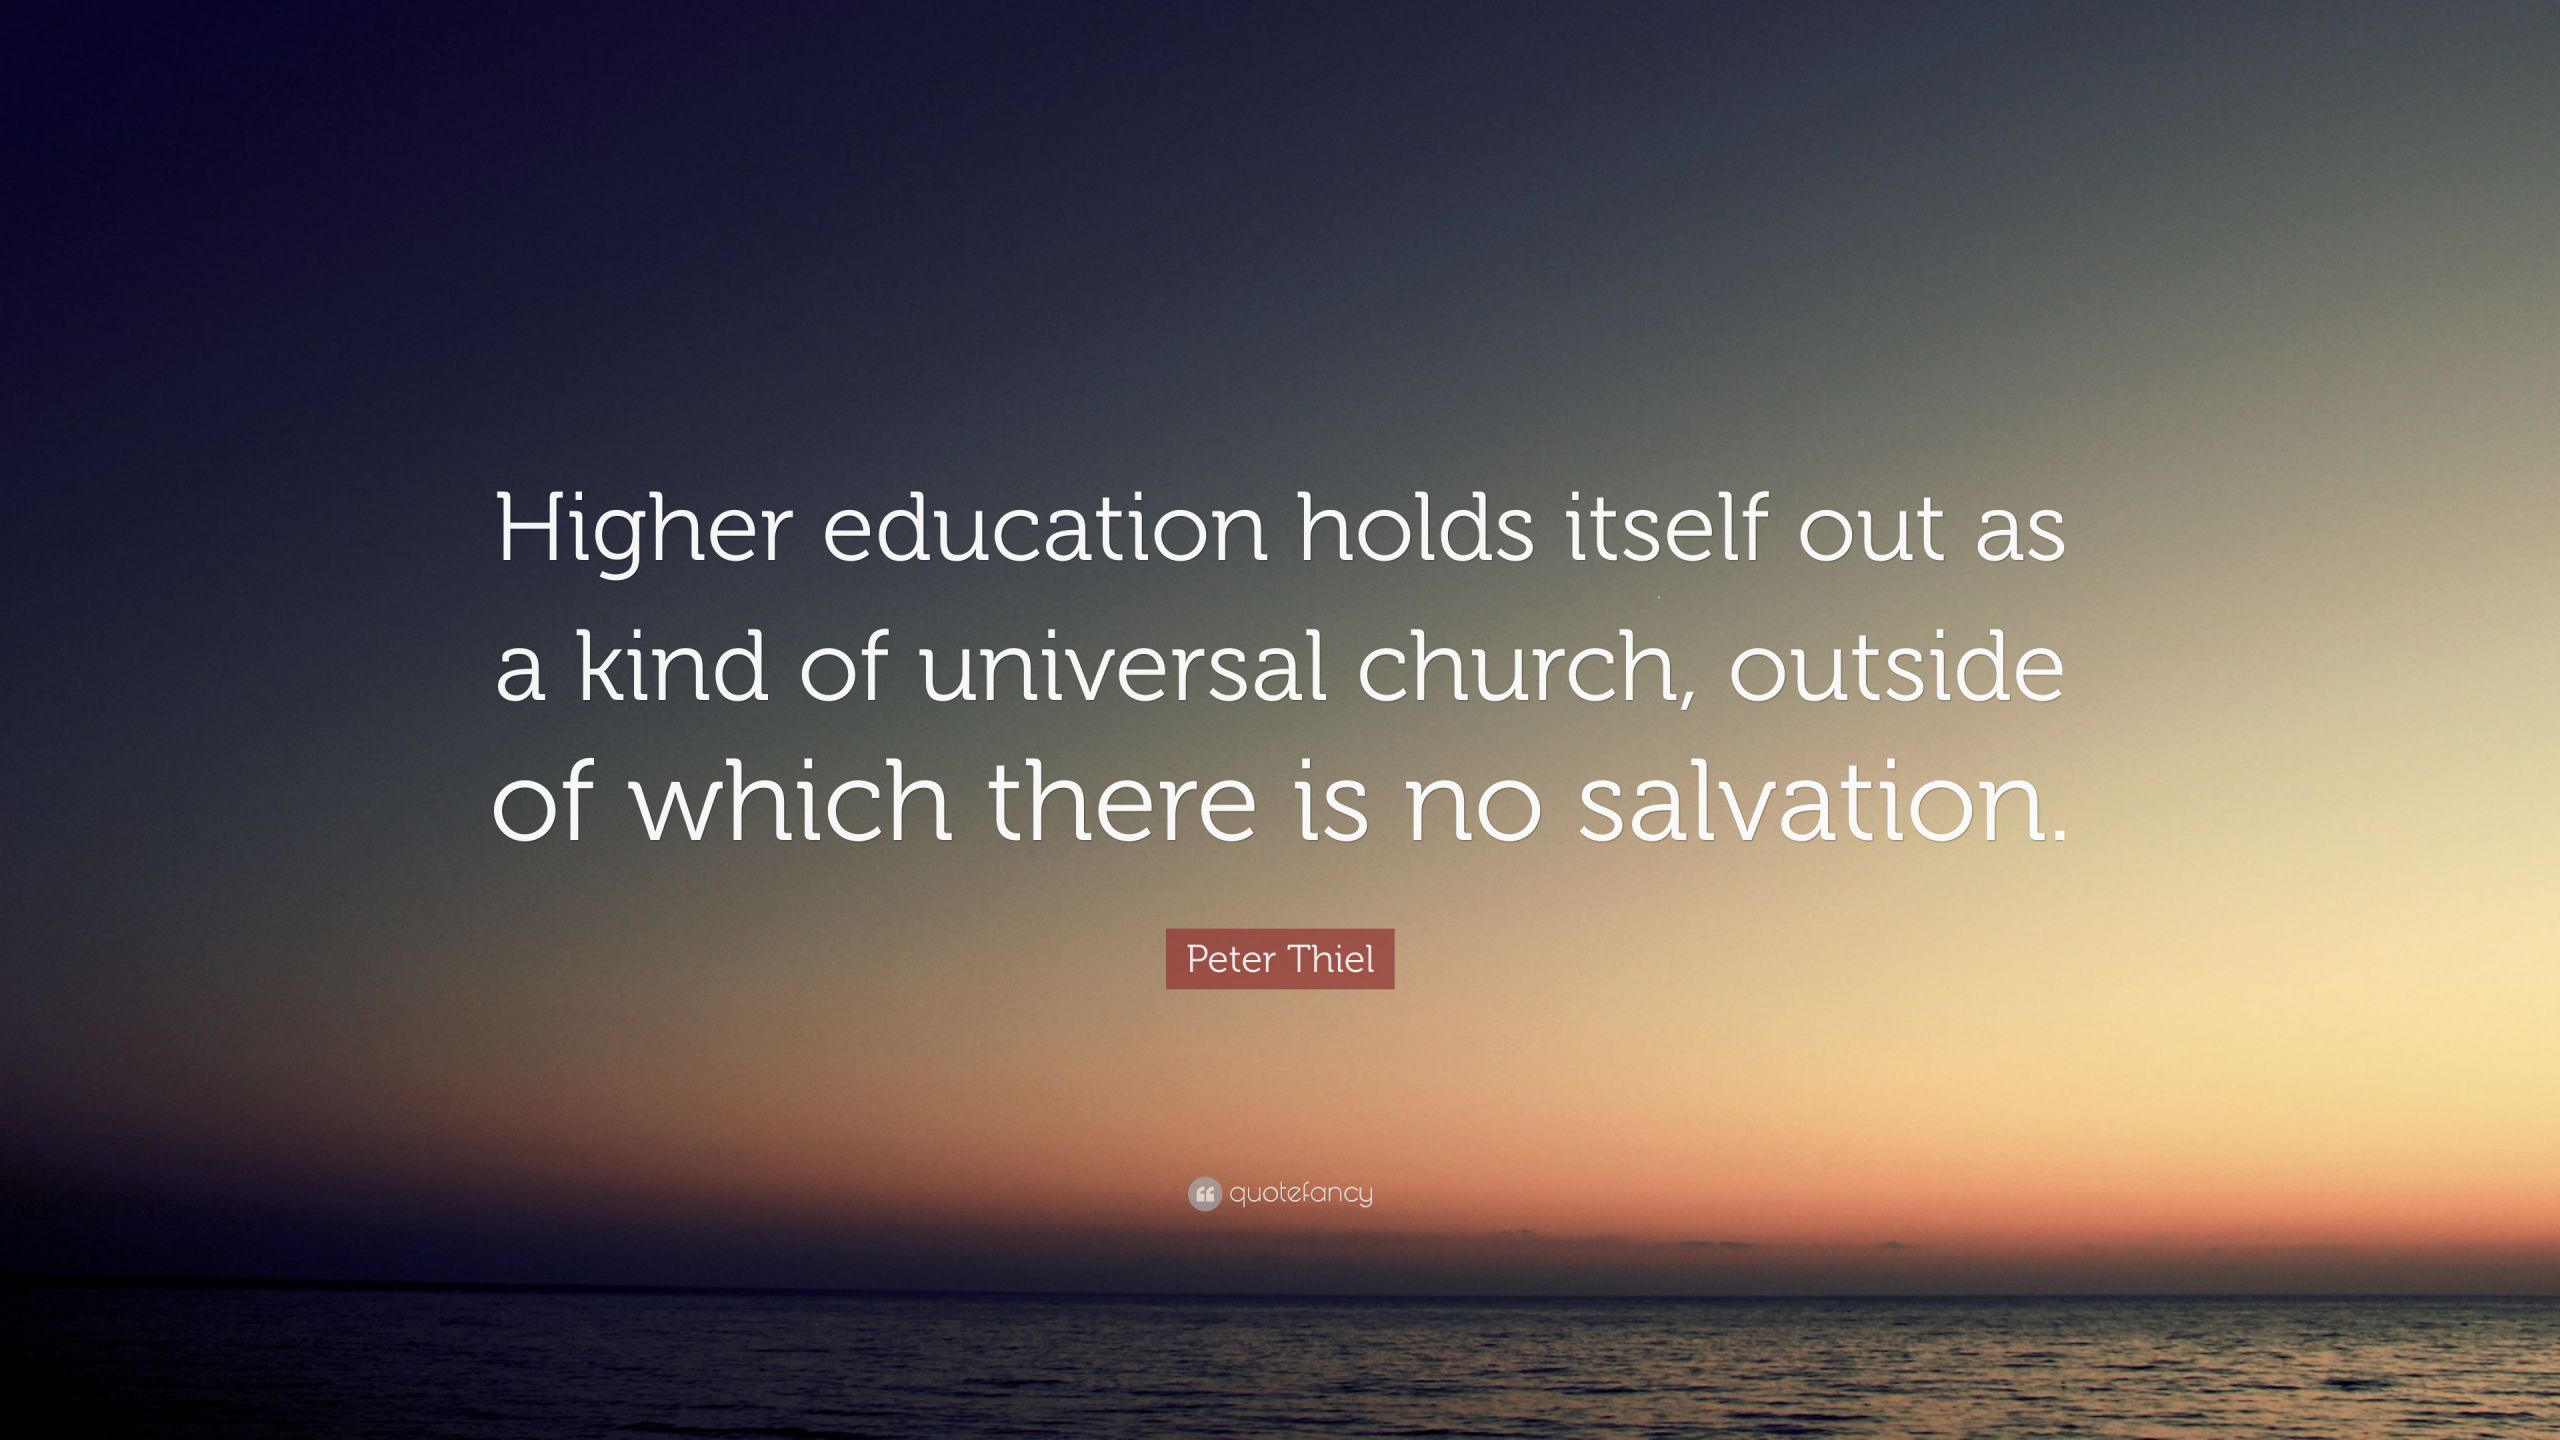 Quote About Higher Education
 Peter Thiel Quote “Higher education holds itself out as a